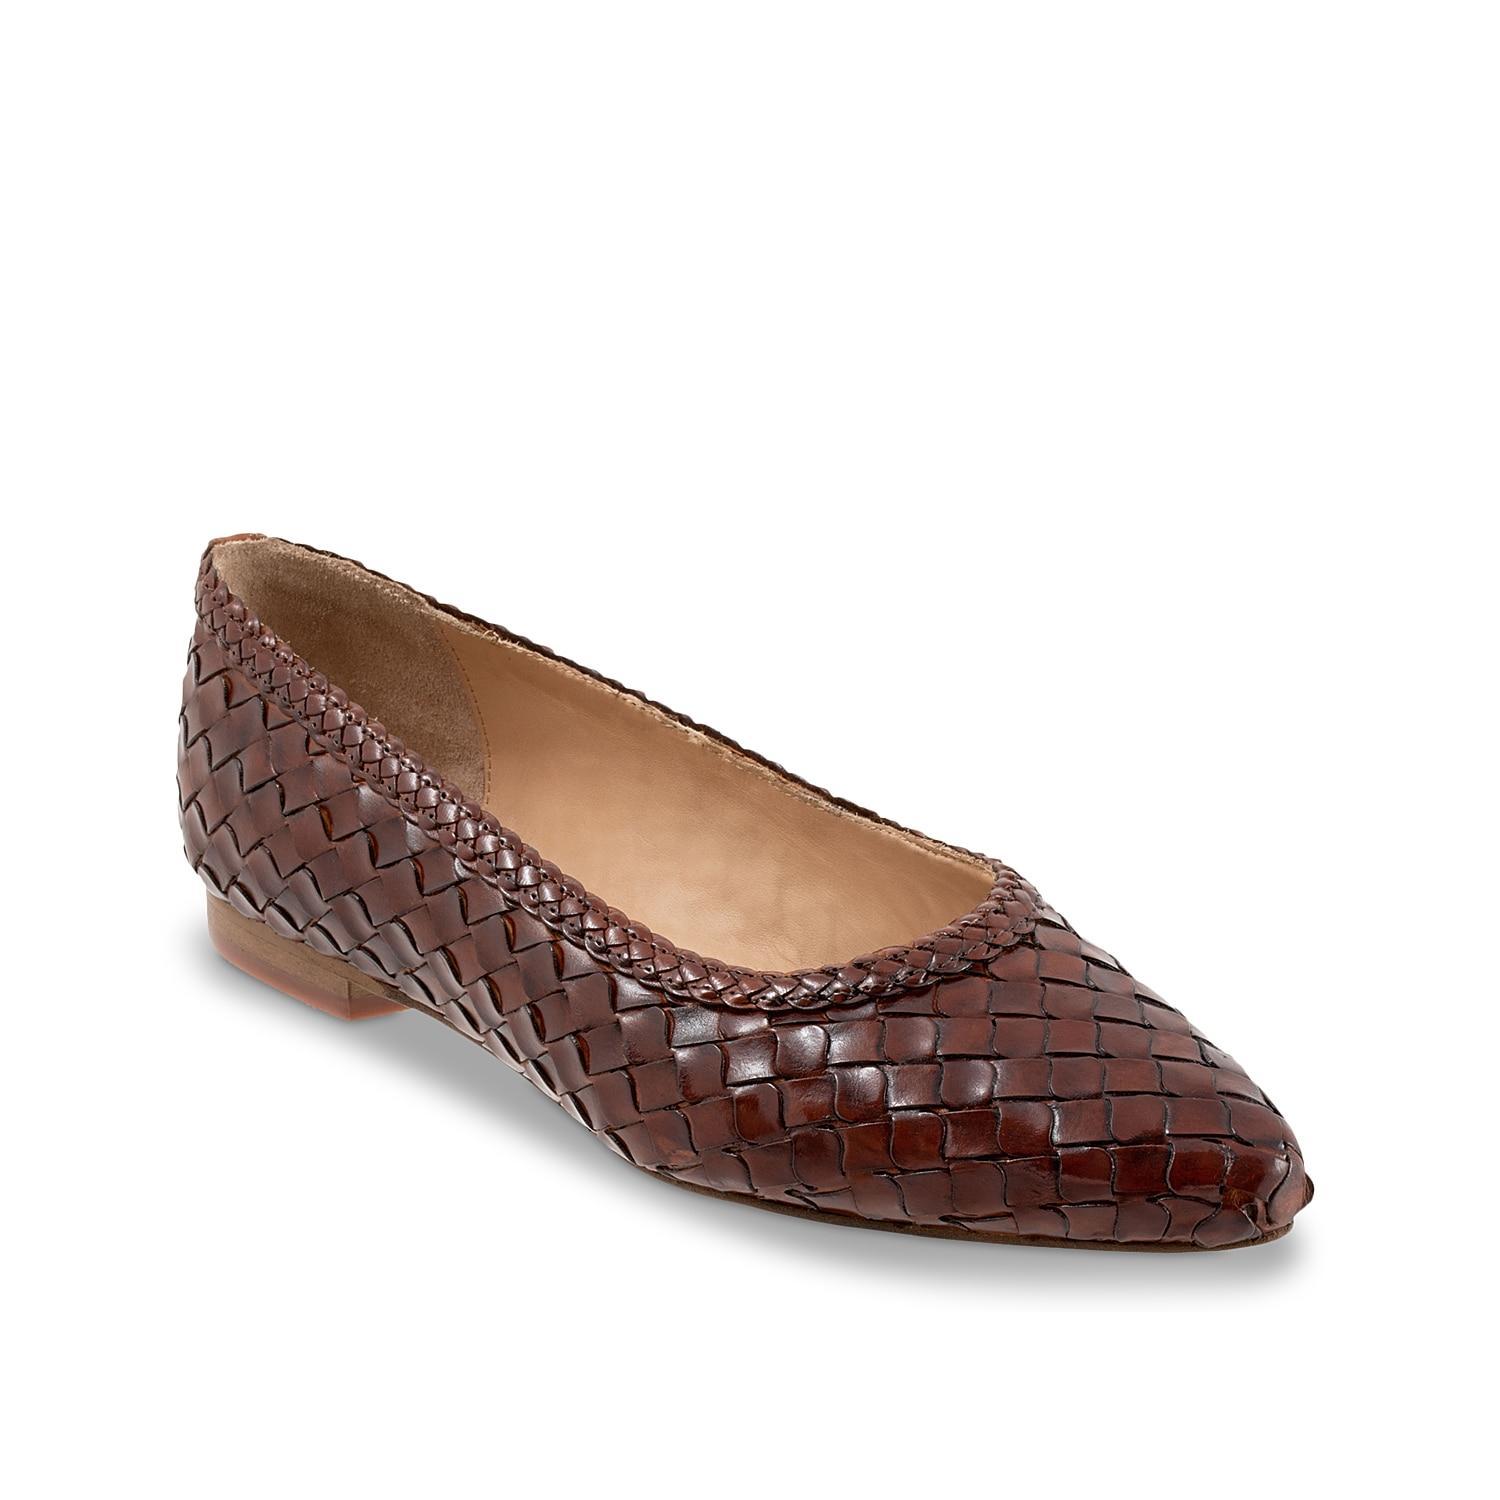 Trotters Emmie Flat Product Image